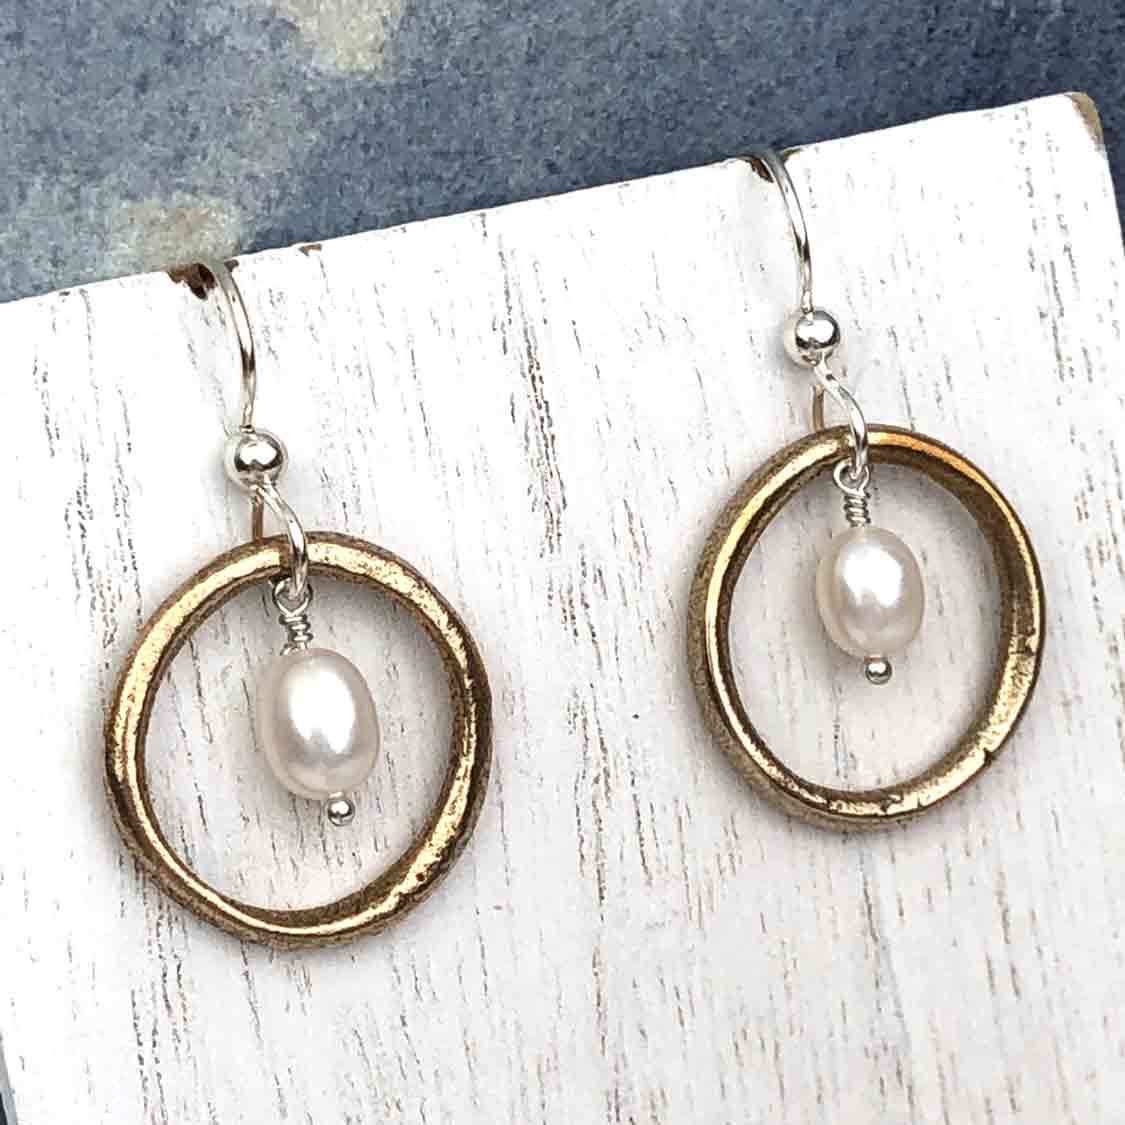 Bright Golden Bronze Celtic Ring Money Earrings with Genuine Pearls